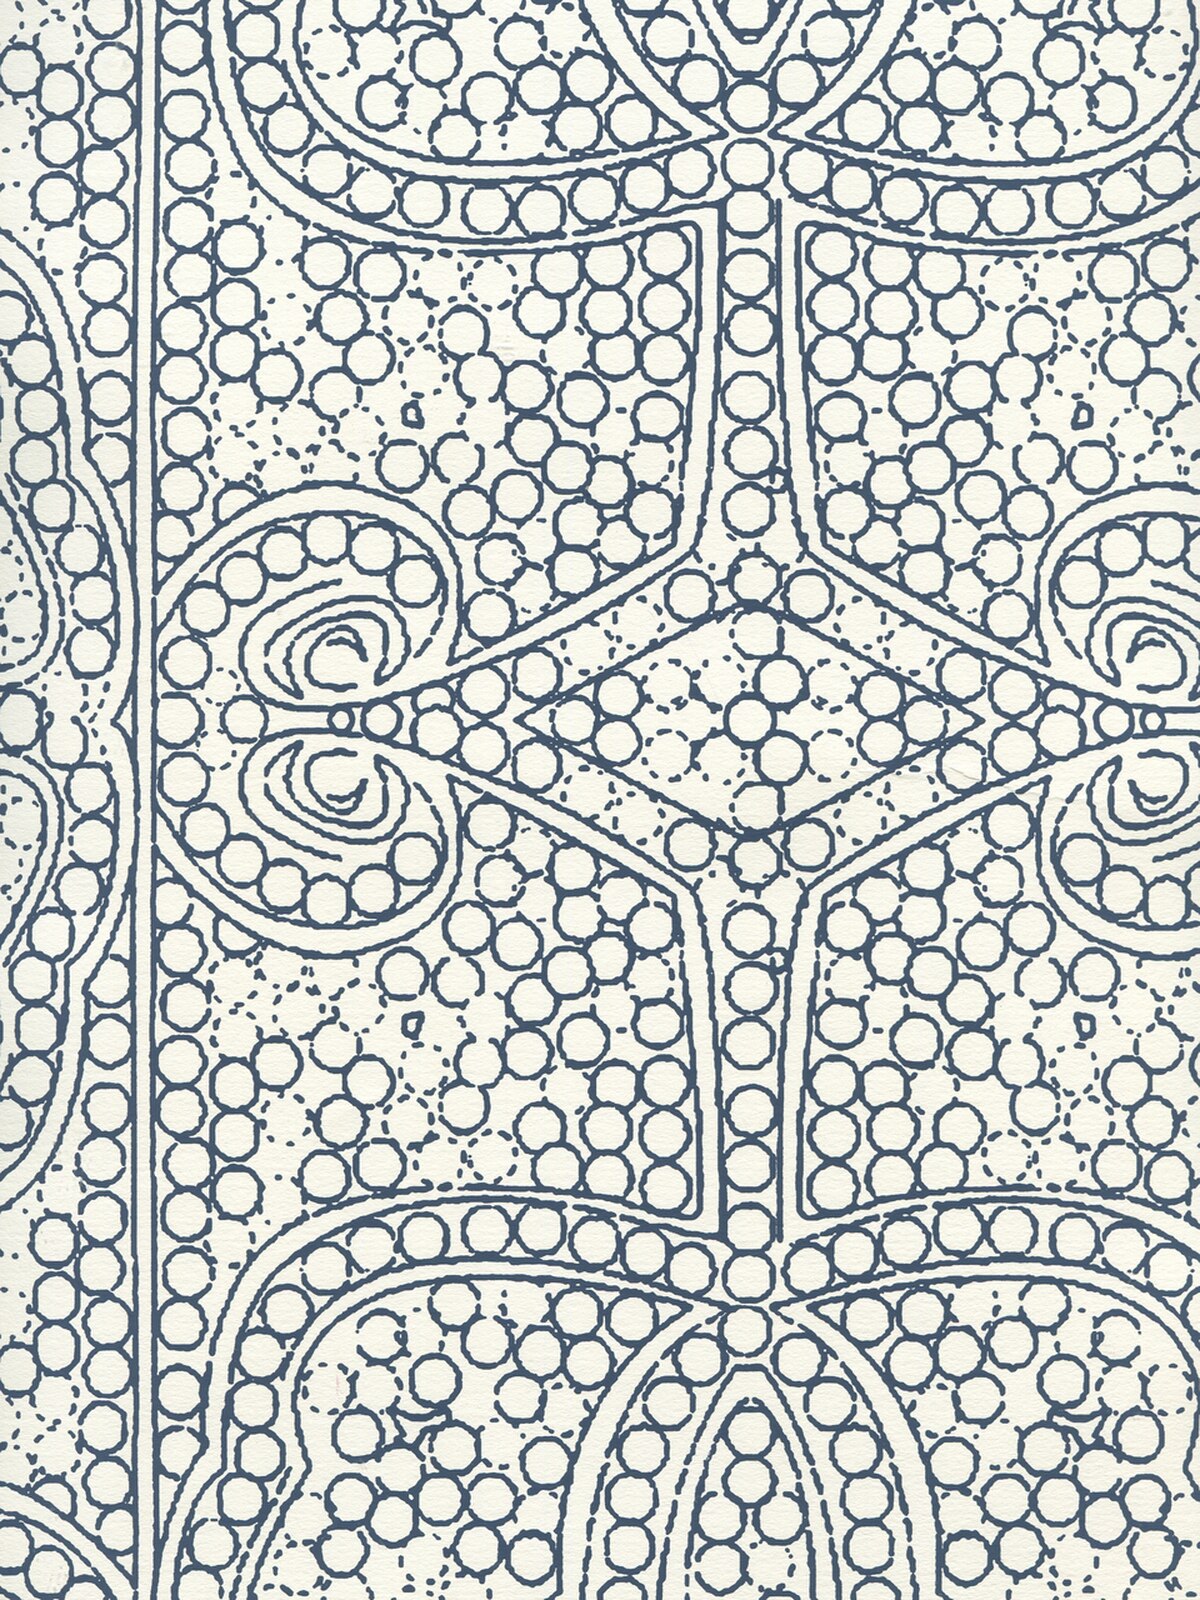 Quadrille Persia Wallpaper Navy On Almost White Cp1000w-09 - Quadrille Persia - HD Wallpaper 